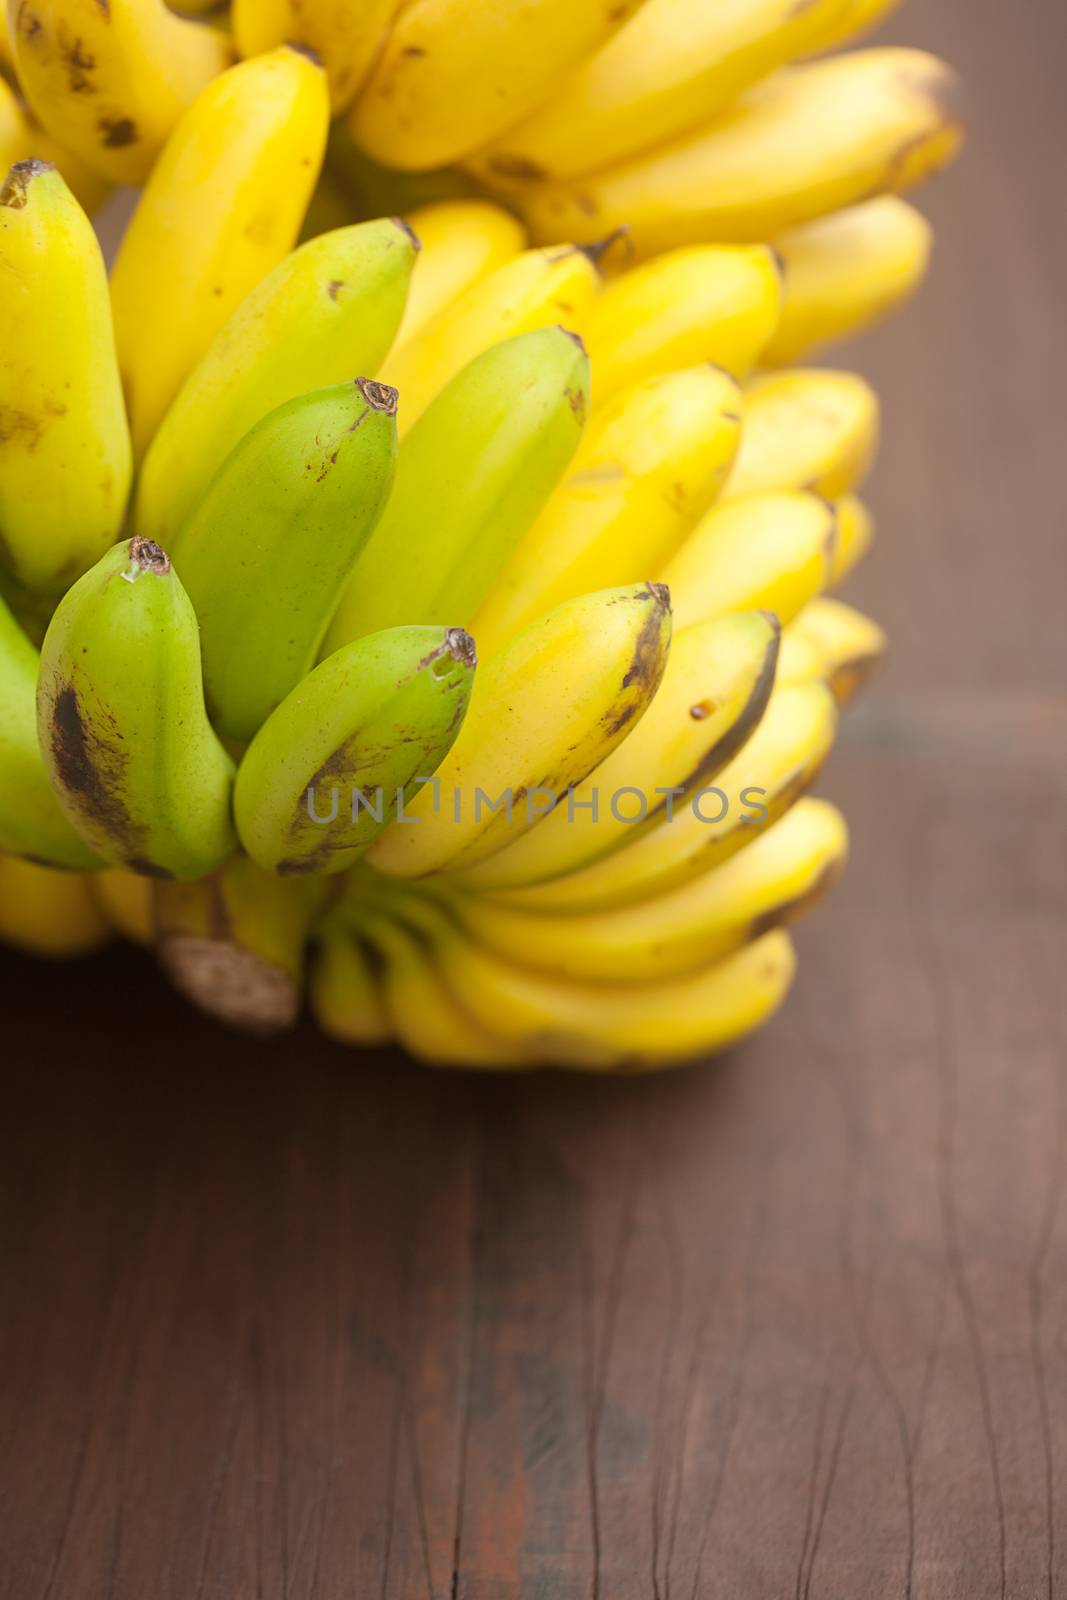 bunch of bananas on a wooden surface by jannyjus